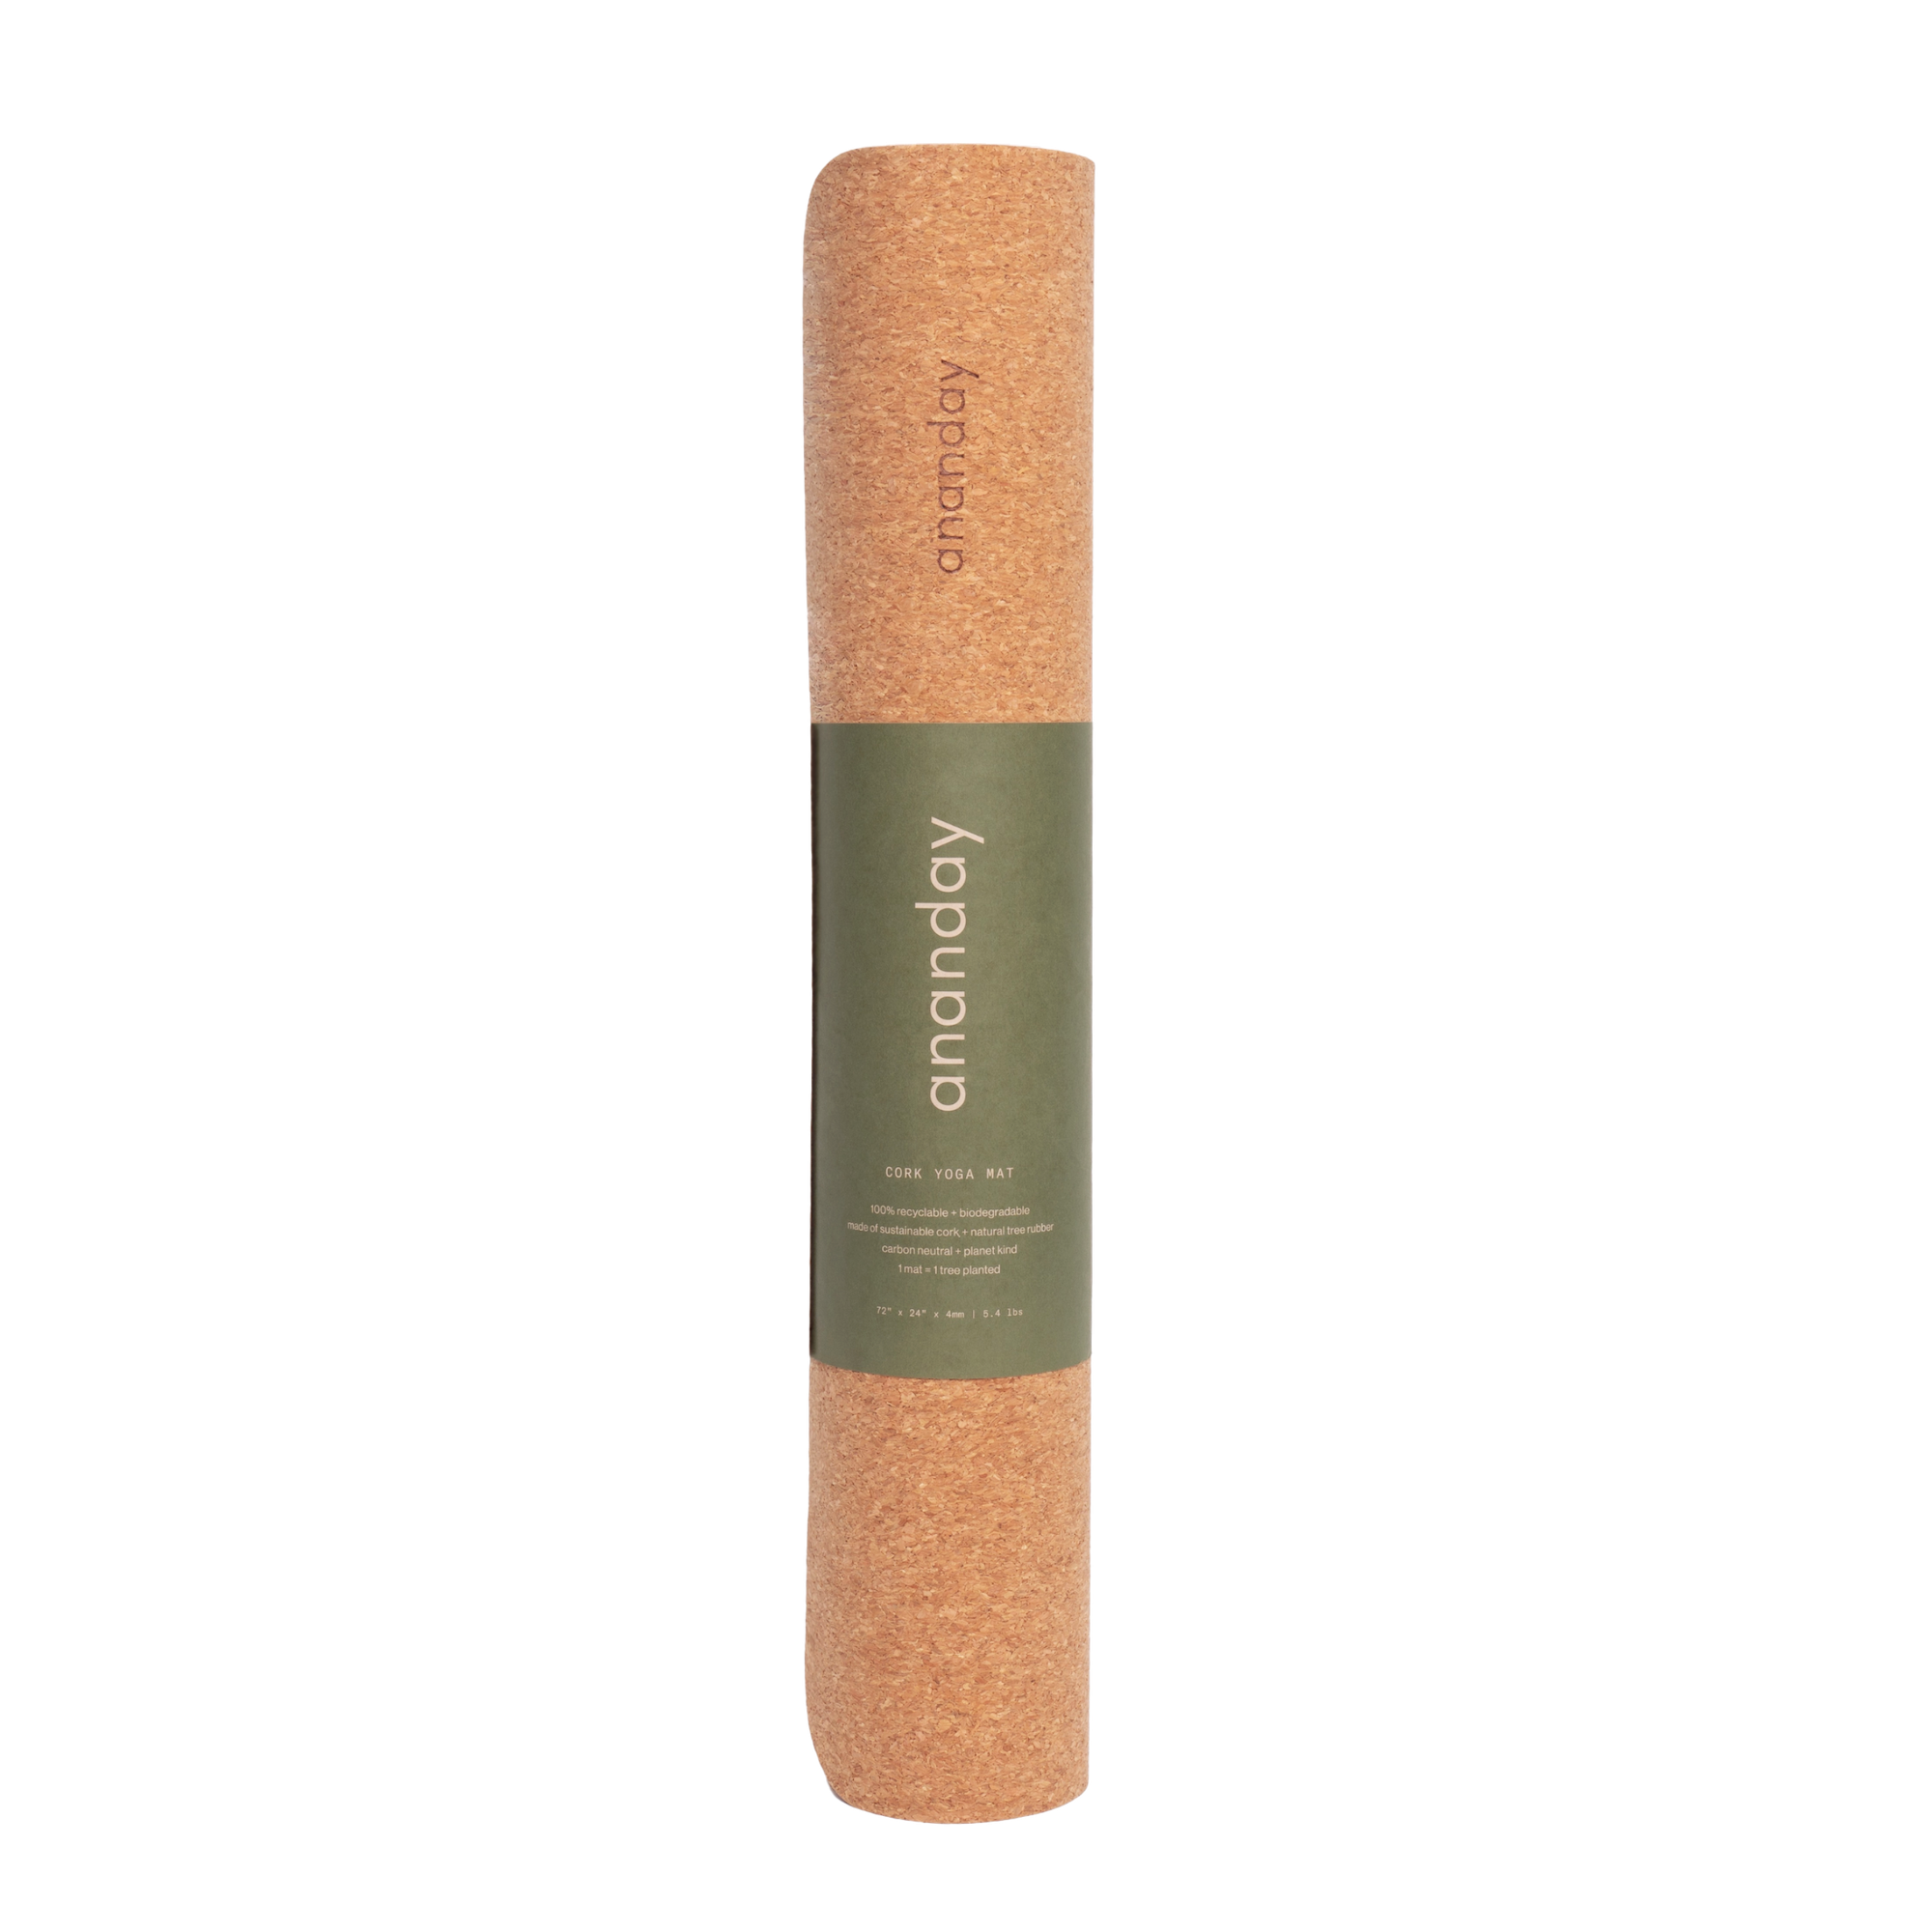 Go Green With Our Natural Ananday Cork Yoga Mat: Eco-friendly, Non-toxic,  and Perfect for Your Practice -  Canada